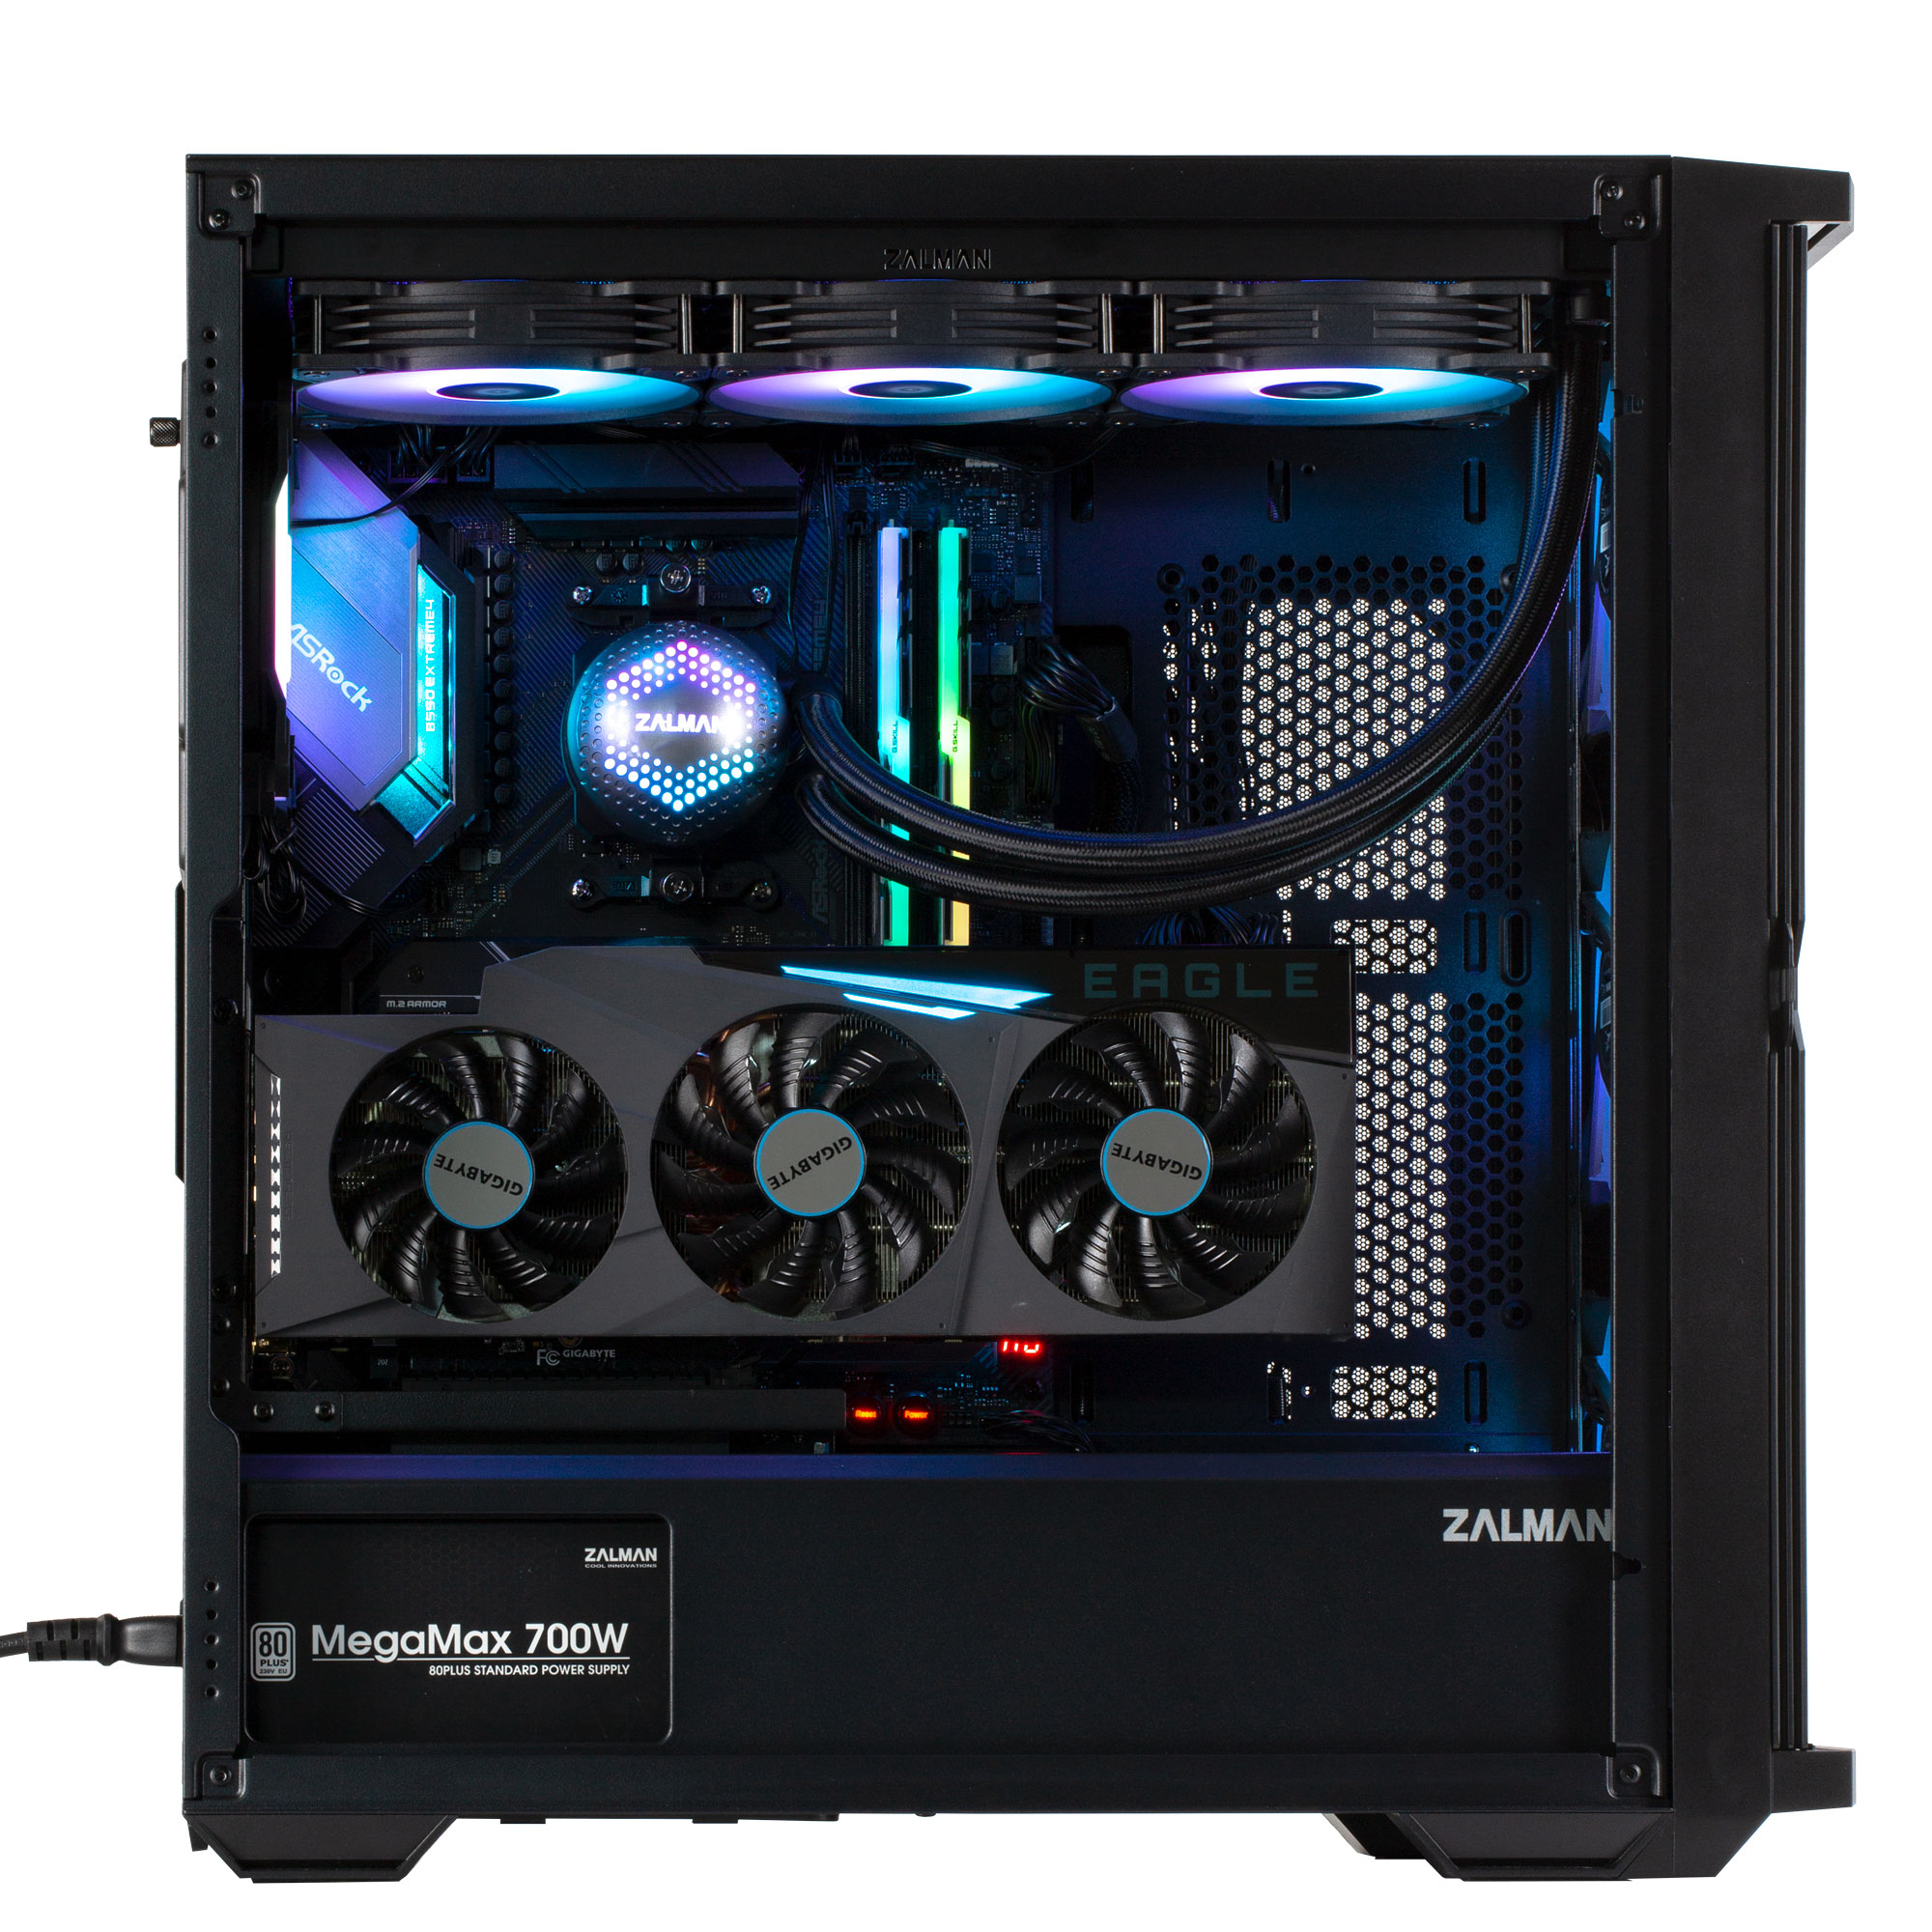 Zalman Z10 Duo - ATX Mid-Tower Case/ Pre-installed fan: 3x 120mm(Front), 1x 120mm(Rear)/ T/G Side Panel, Mesh and Glas Front Panel/ Dust Filter at Front/ 1x USB Type-C applied/ GPU Support Brace Included/ Dimension : 481 x 220 x 488 (H)mm